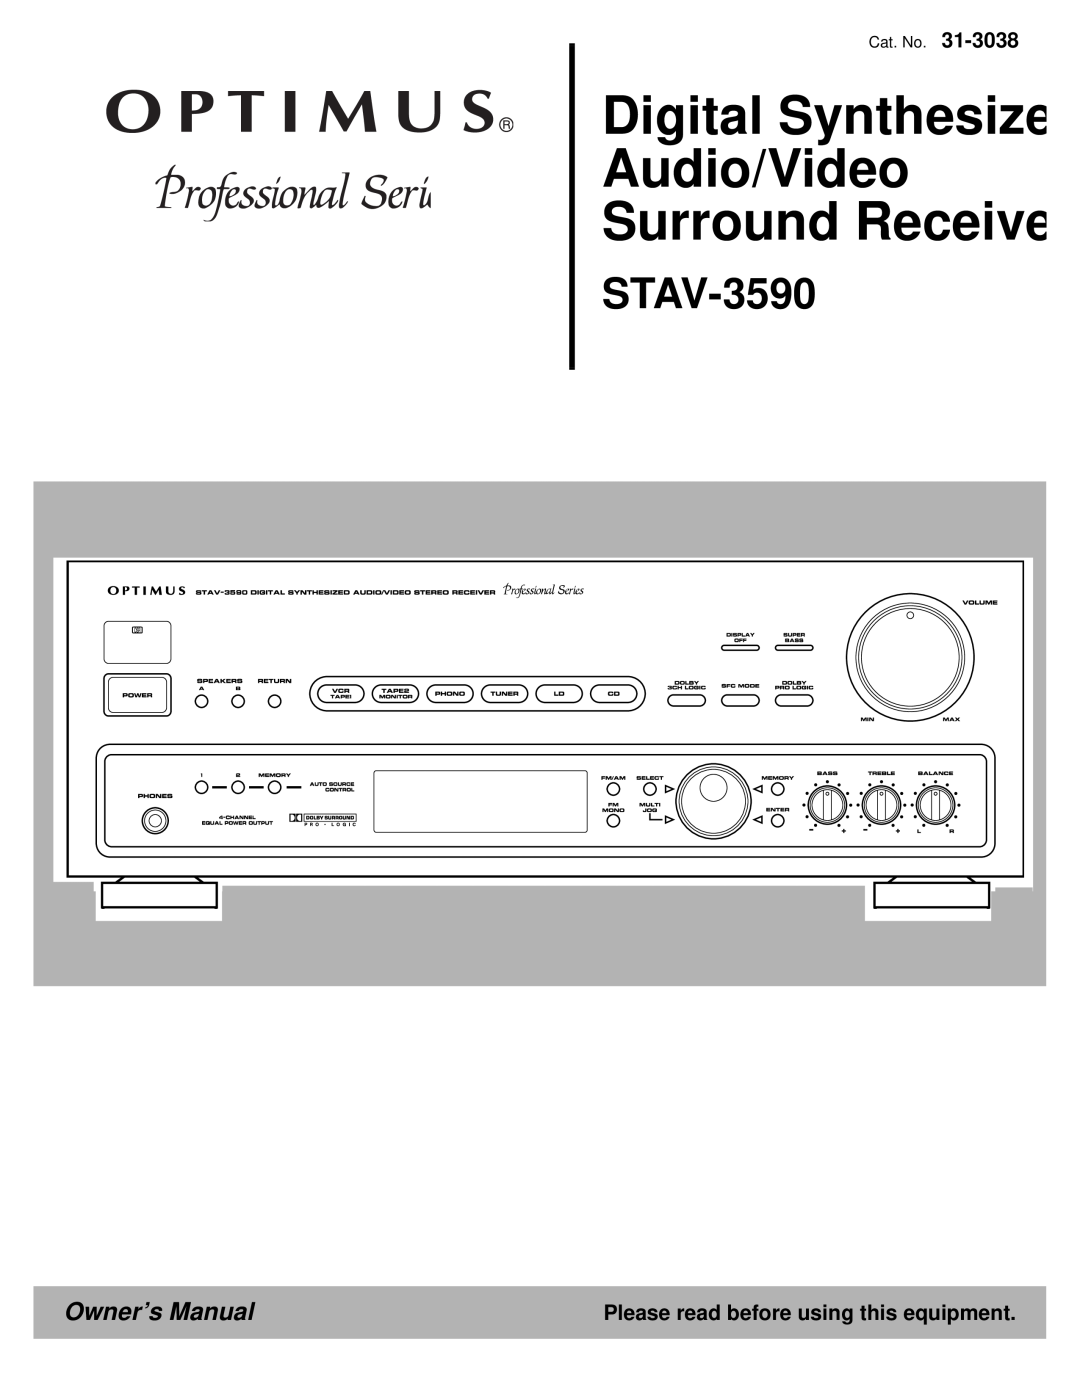 Optimus STAV-3590 owner manual Please read before using this equipment, Digital Synthesize Audio/Video Surround Receive 